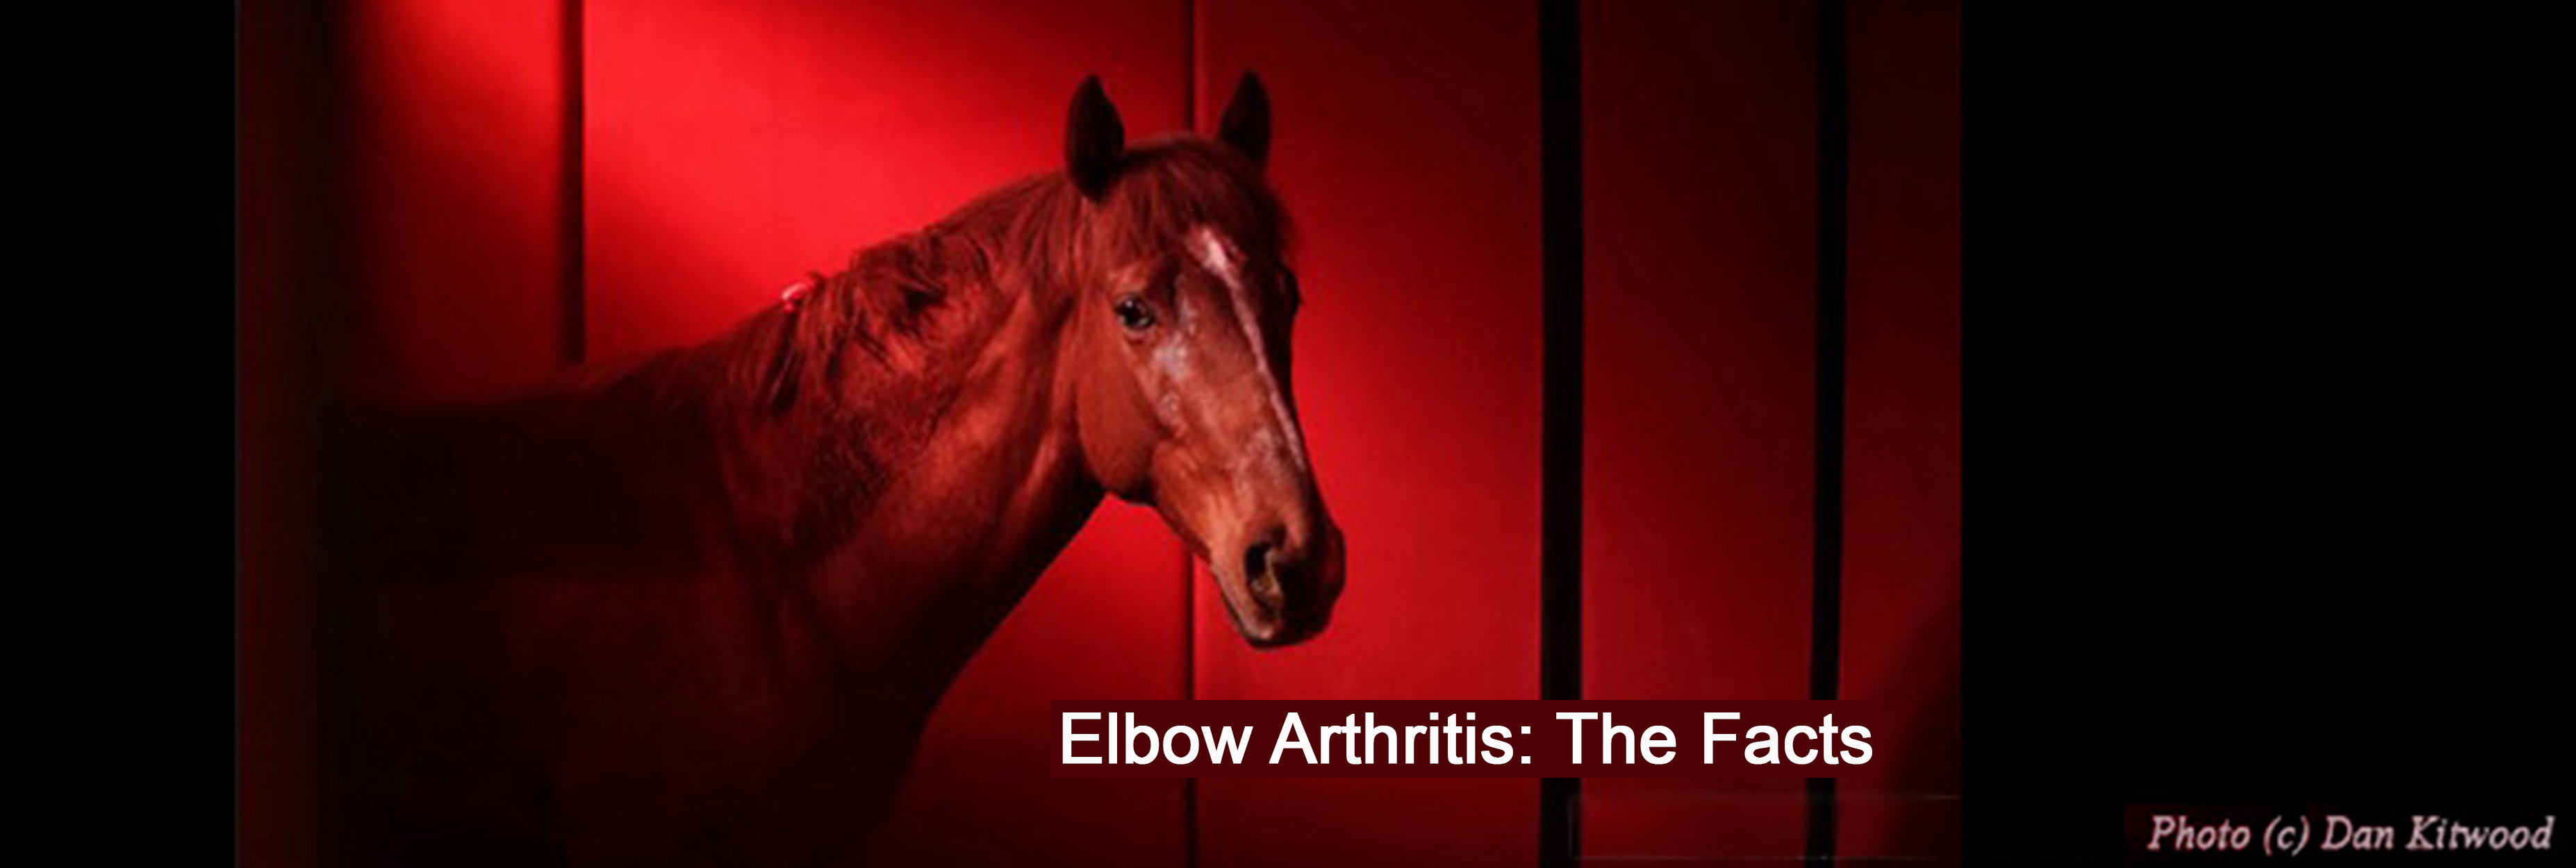 Revealed: the Common Equine Arthritis You Won’t Read About in Textbooks